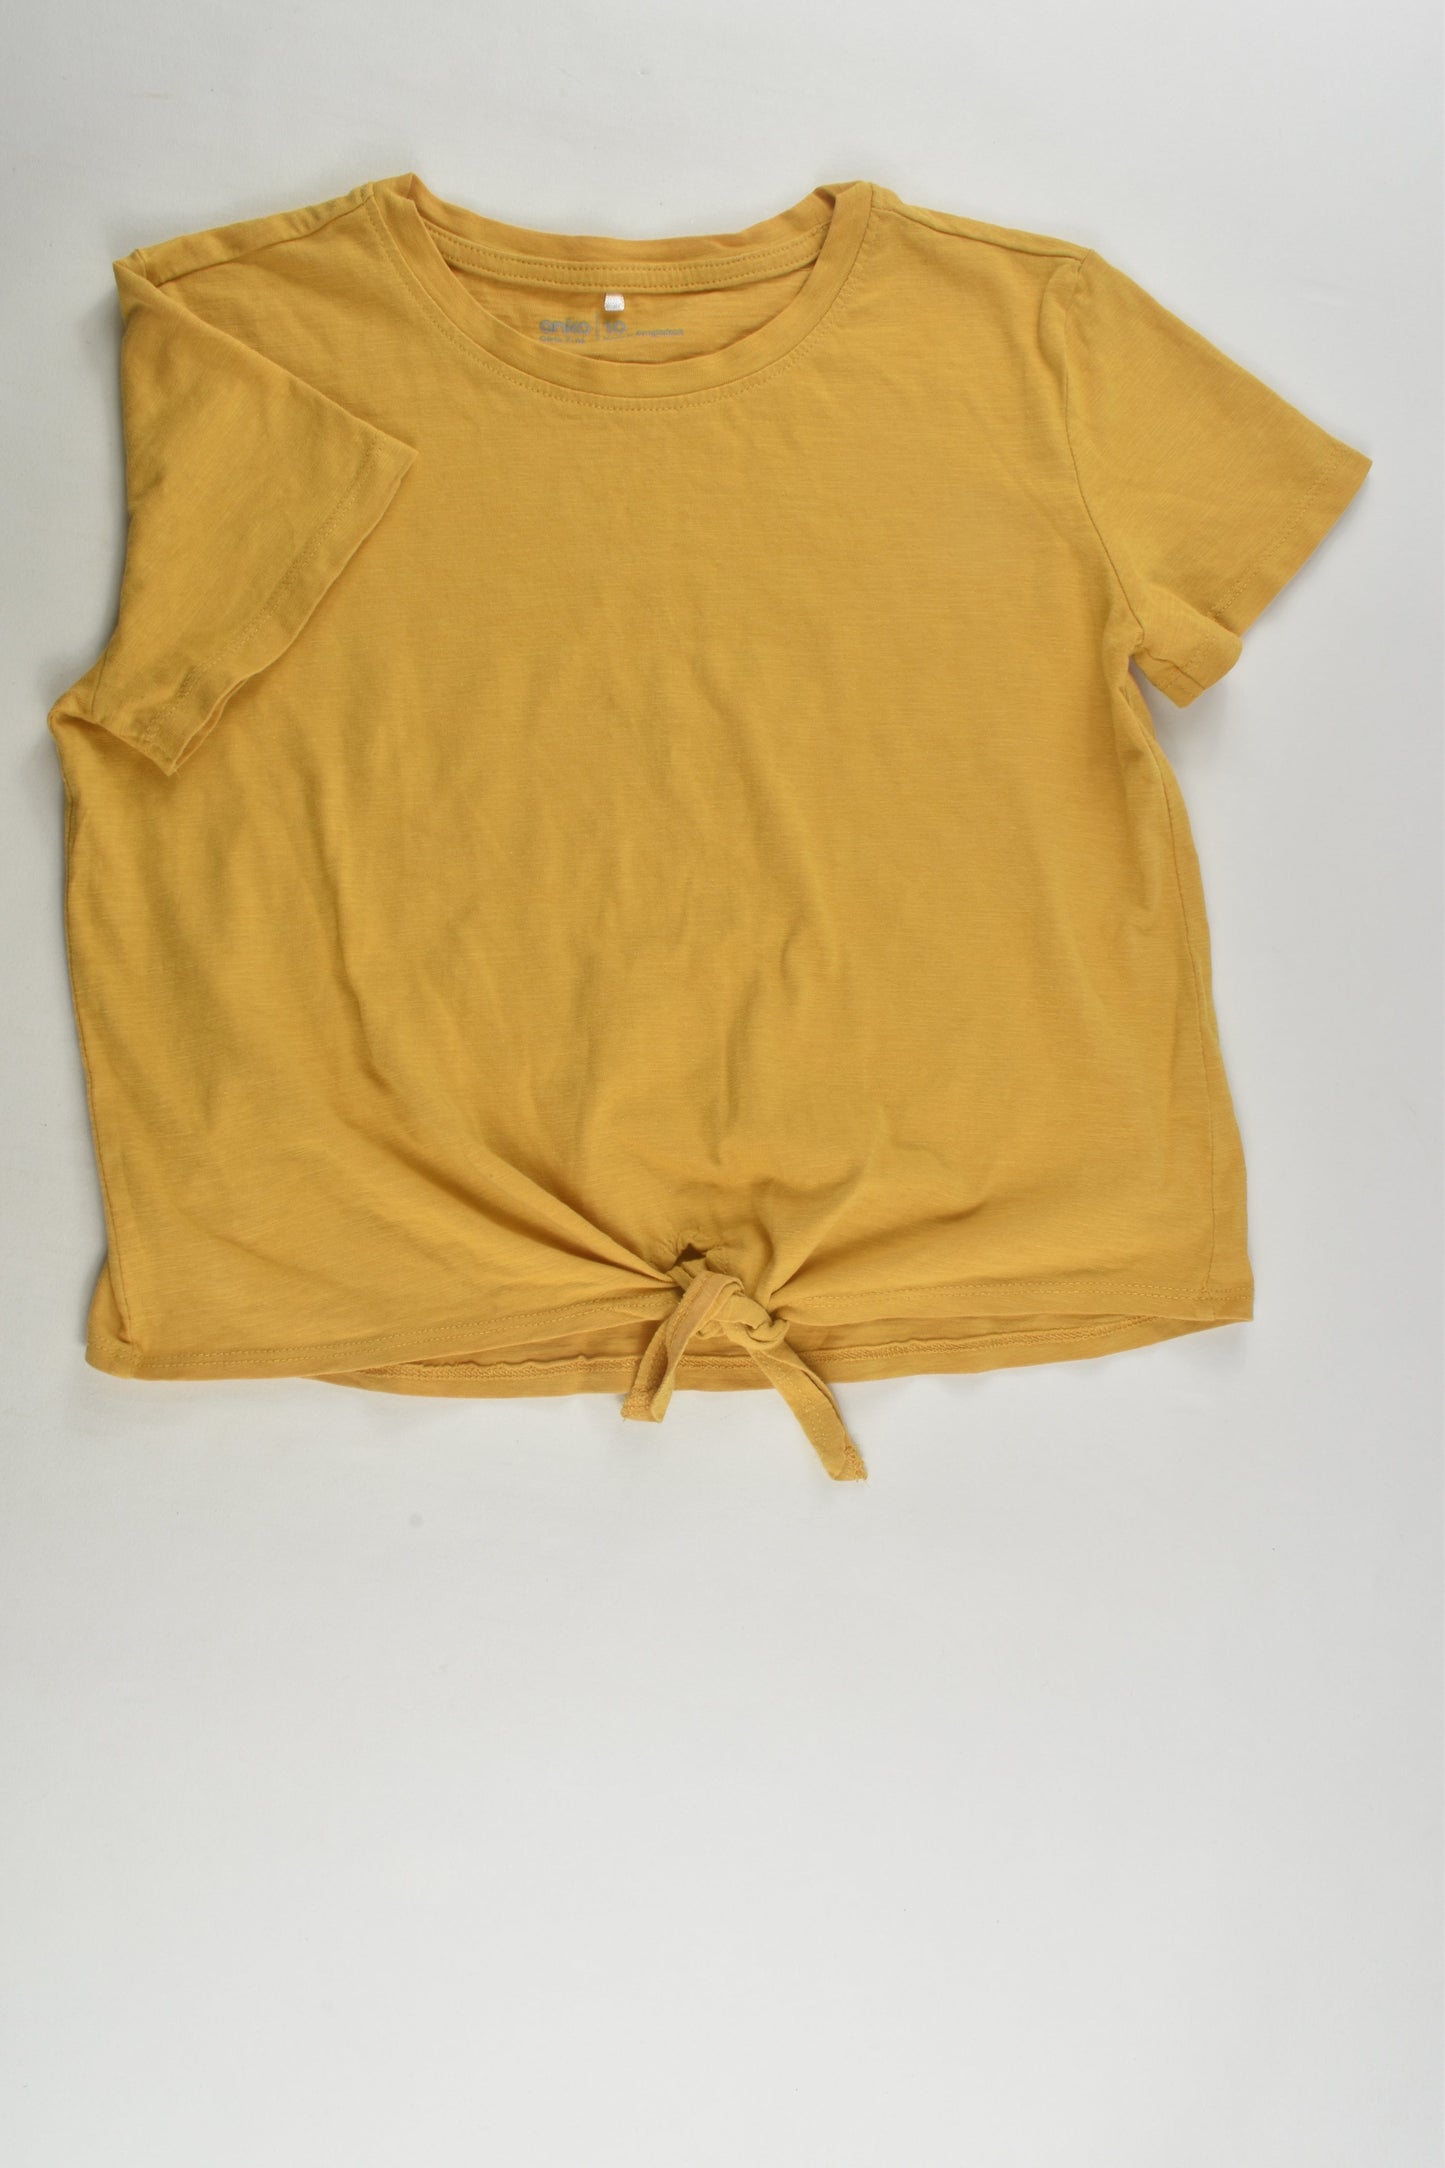 Anko Size 10 Tie-Front T-shirt